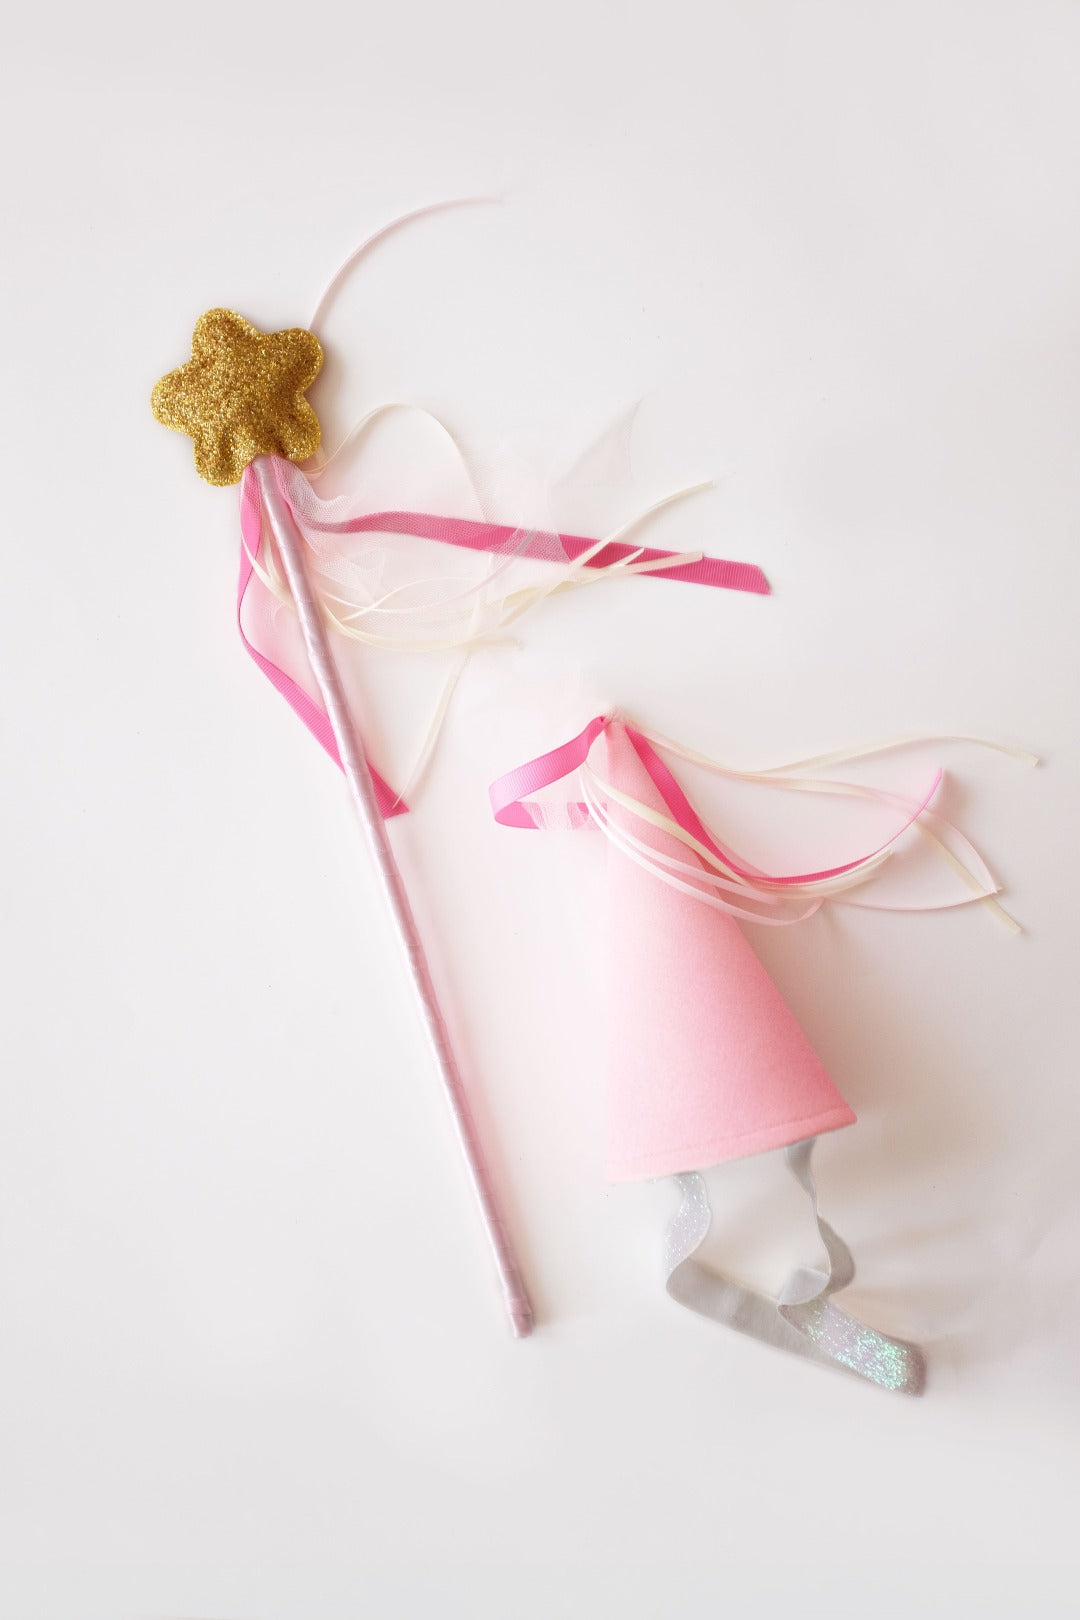 magical sparkly wand and pink party hat